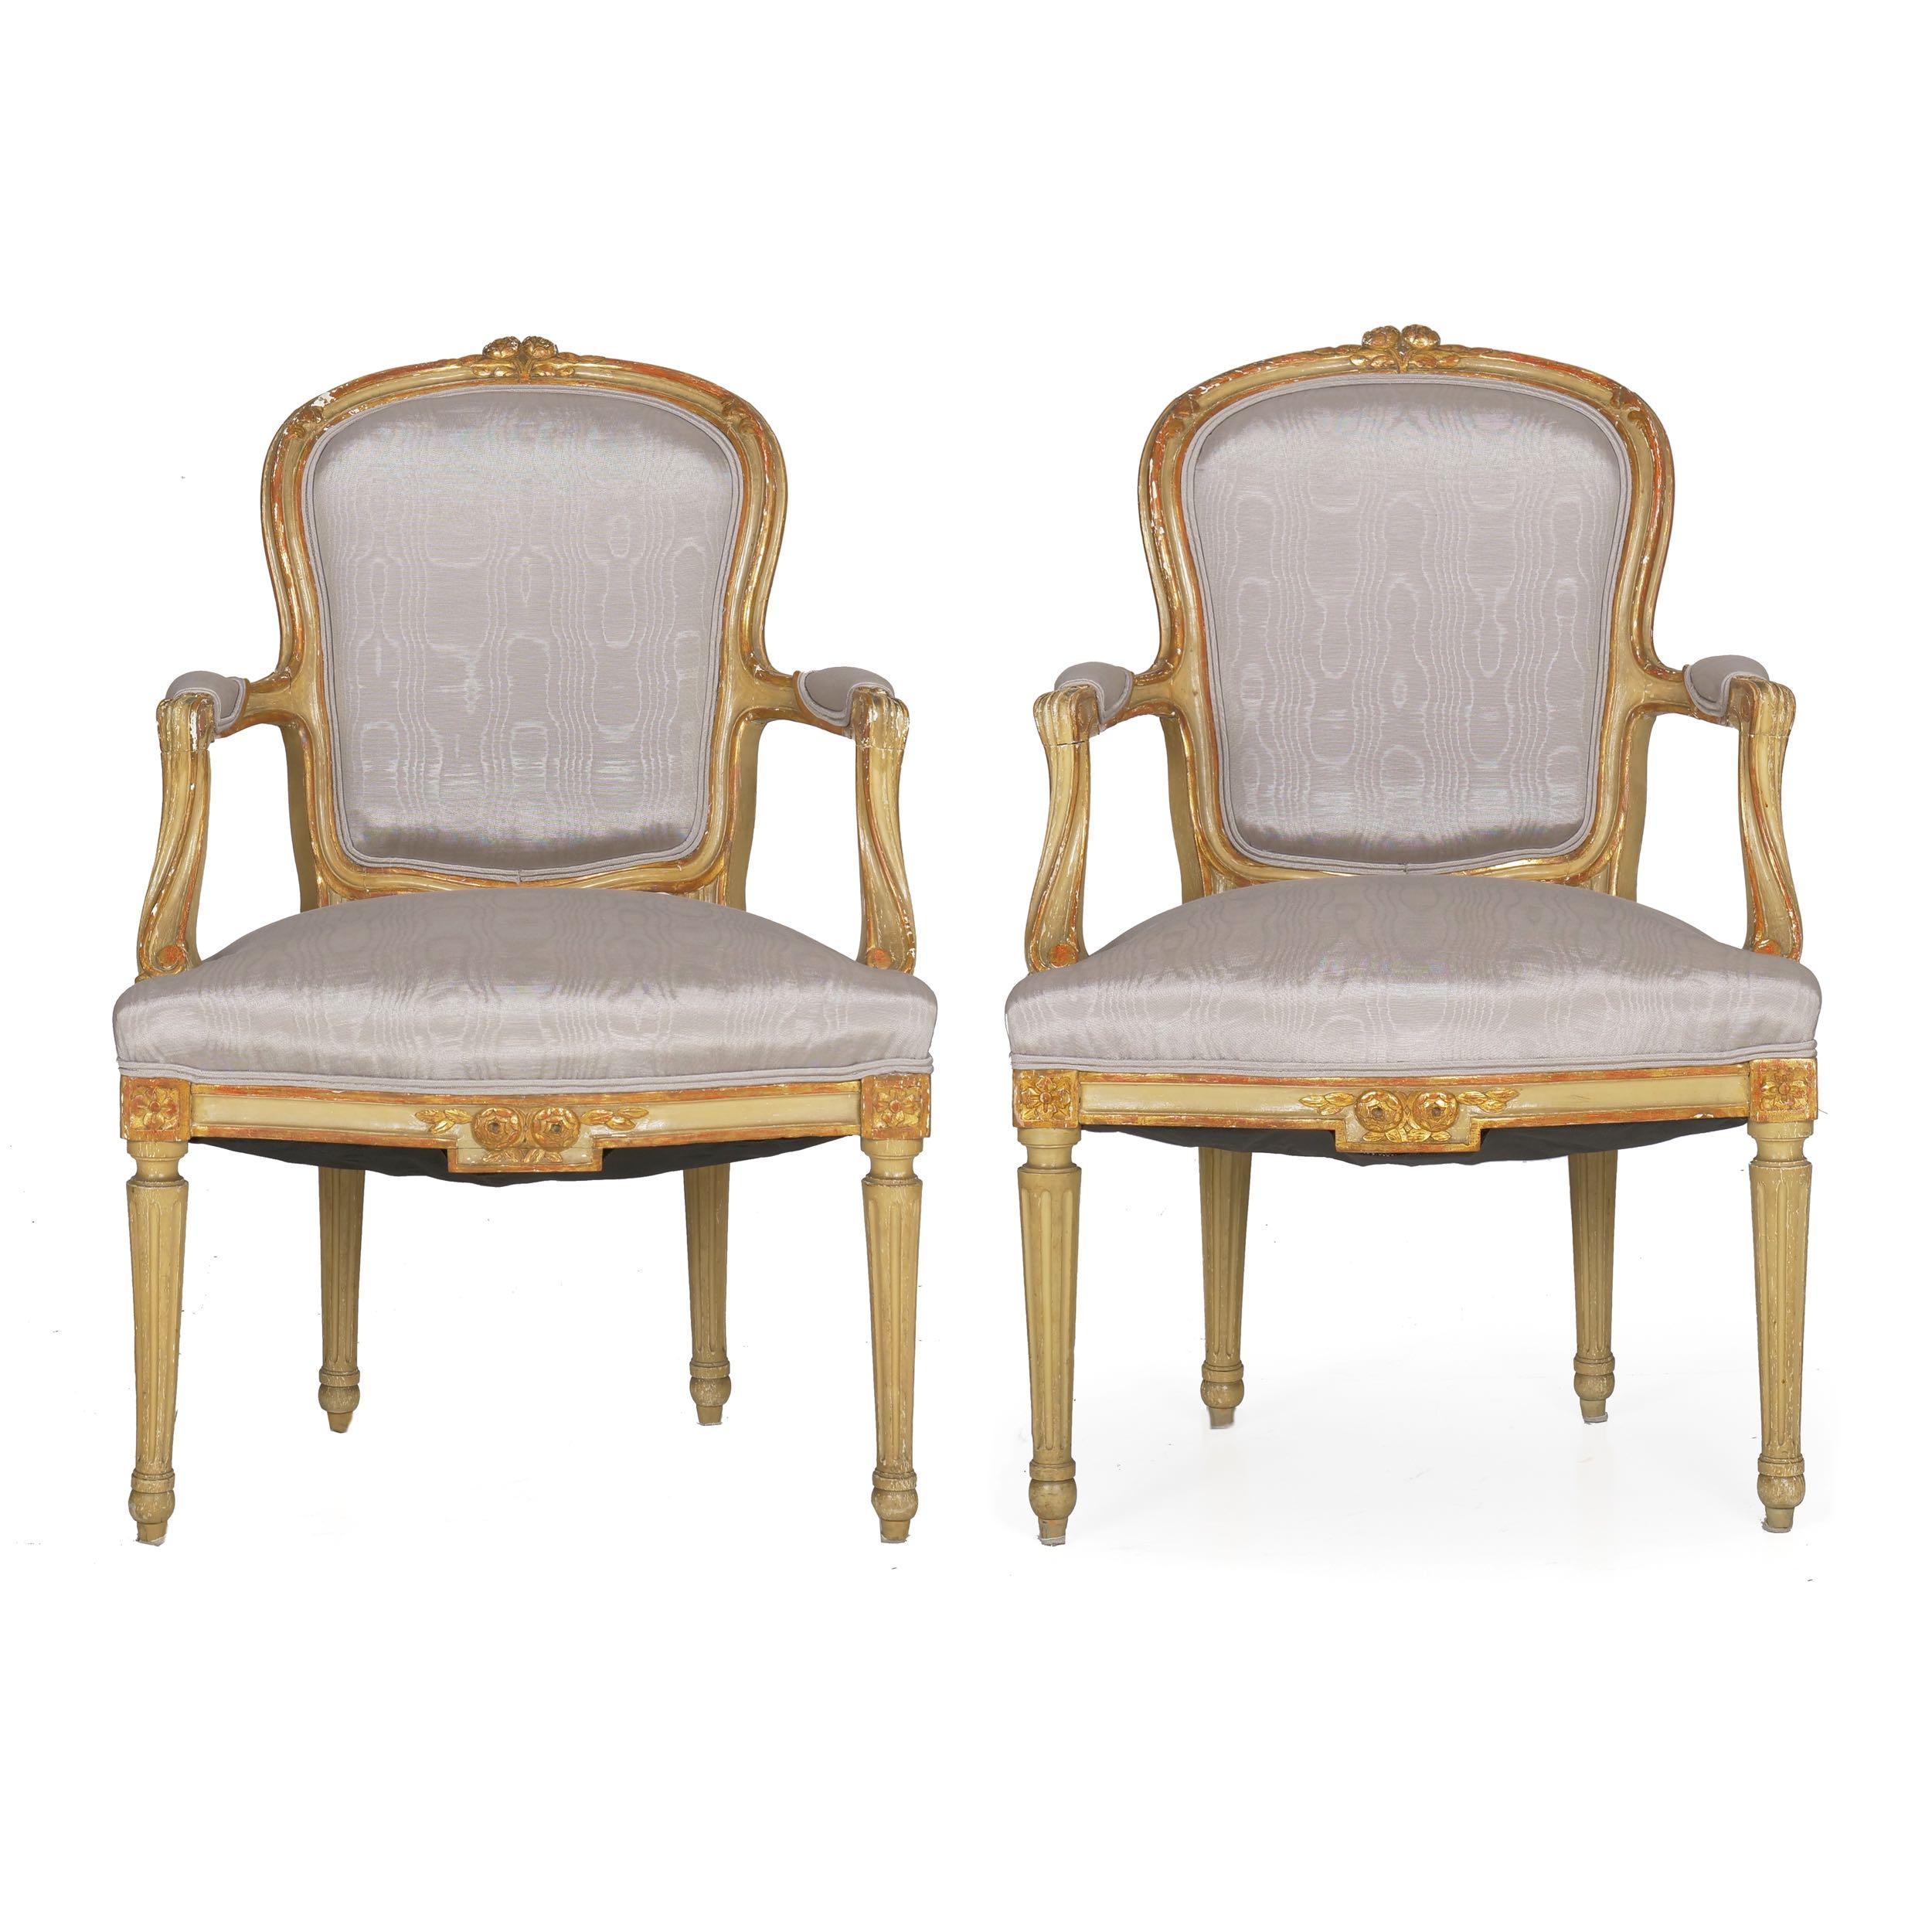 Pair of French neoclassical painted fauteuils,
circa late 19th century
Item # 007DPG30

This fantastic 19th century pair of armchairs is carved in the taste of the Louis XVI period with the typical fluted legs, cabriolet arm supports, and simple